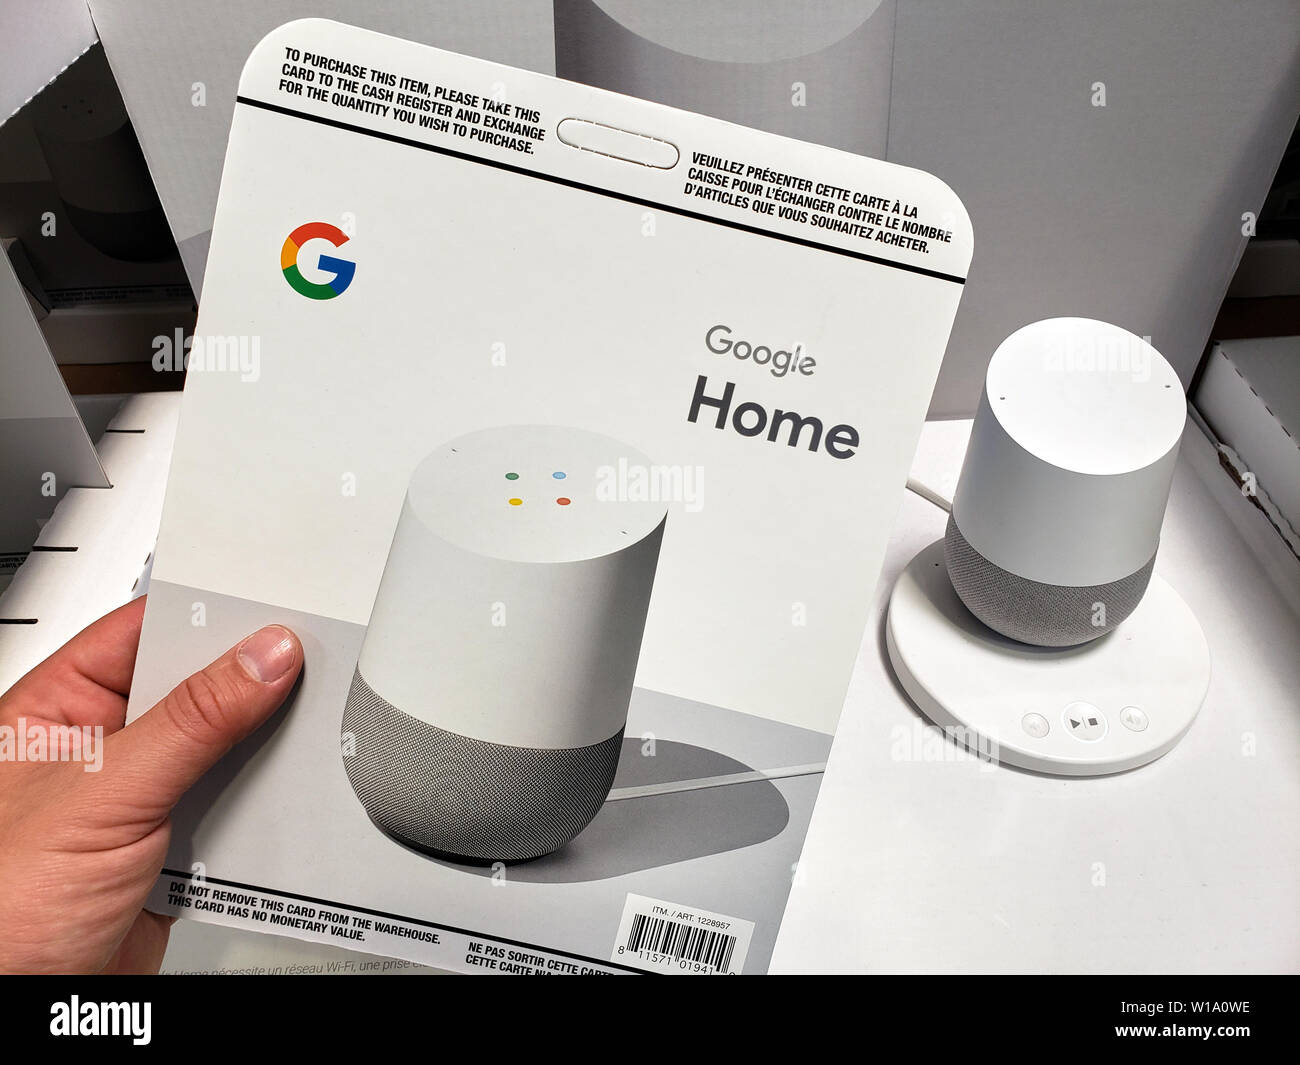 Google Home Mini High Resolution Stock Photography and Images - Alamy